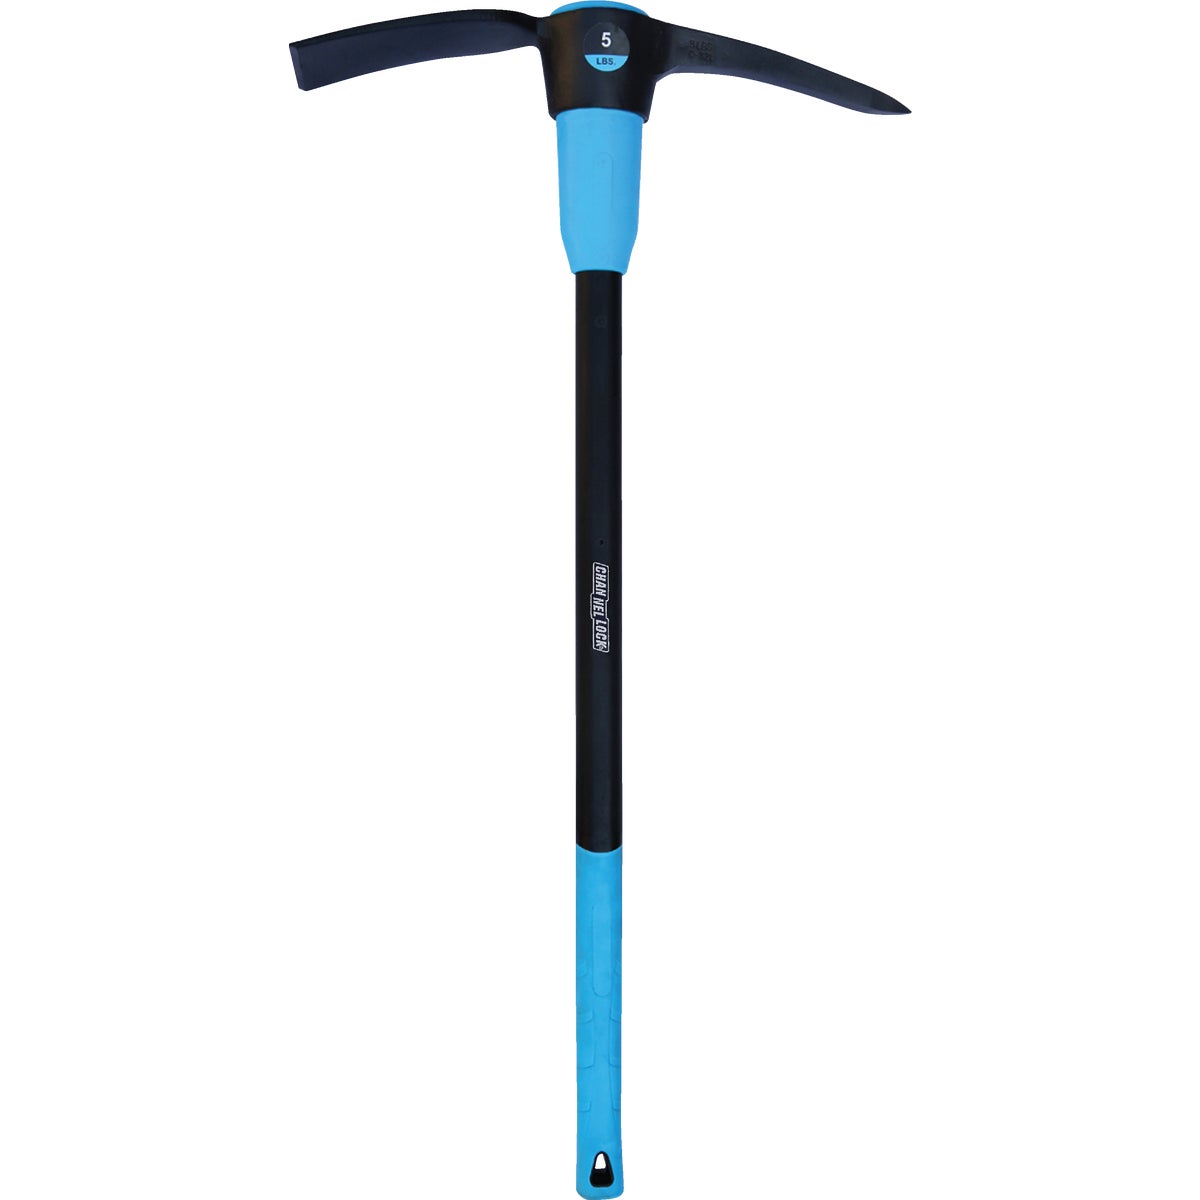 Item 300265, This pick mattock has a head forged from high-quality carbon steel.